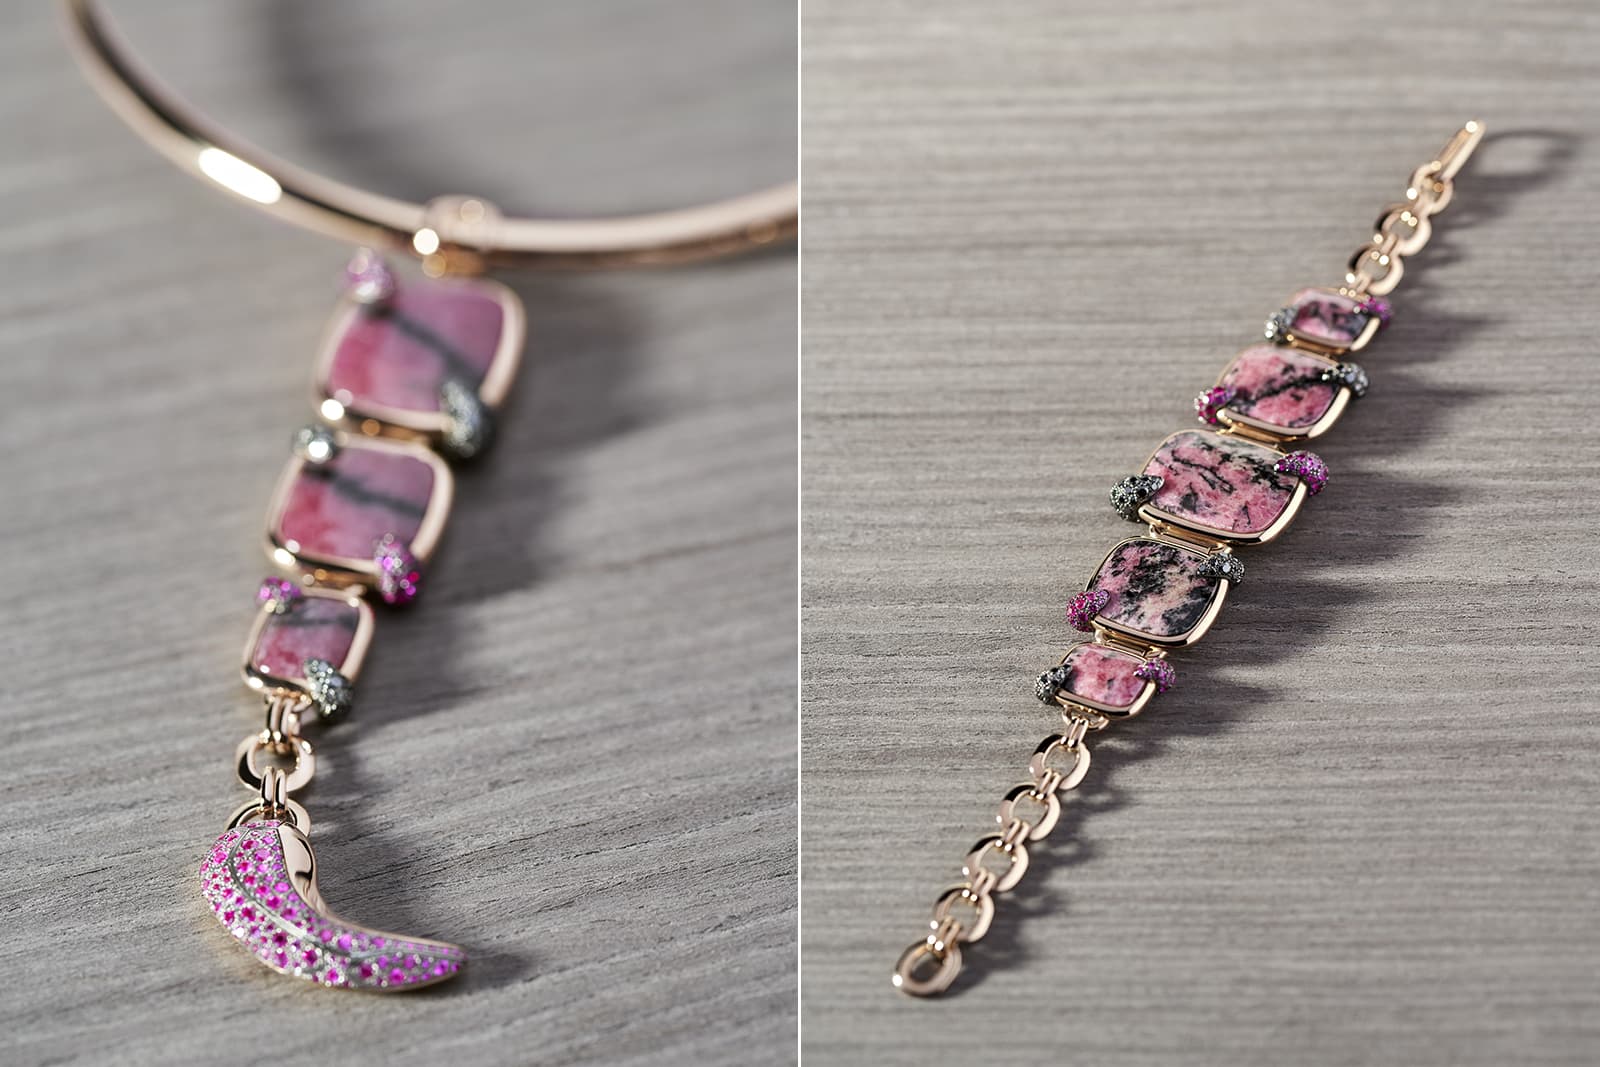 The raw beauty of rhodonite is showcased in the Mineralismo necklace 